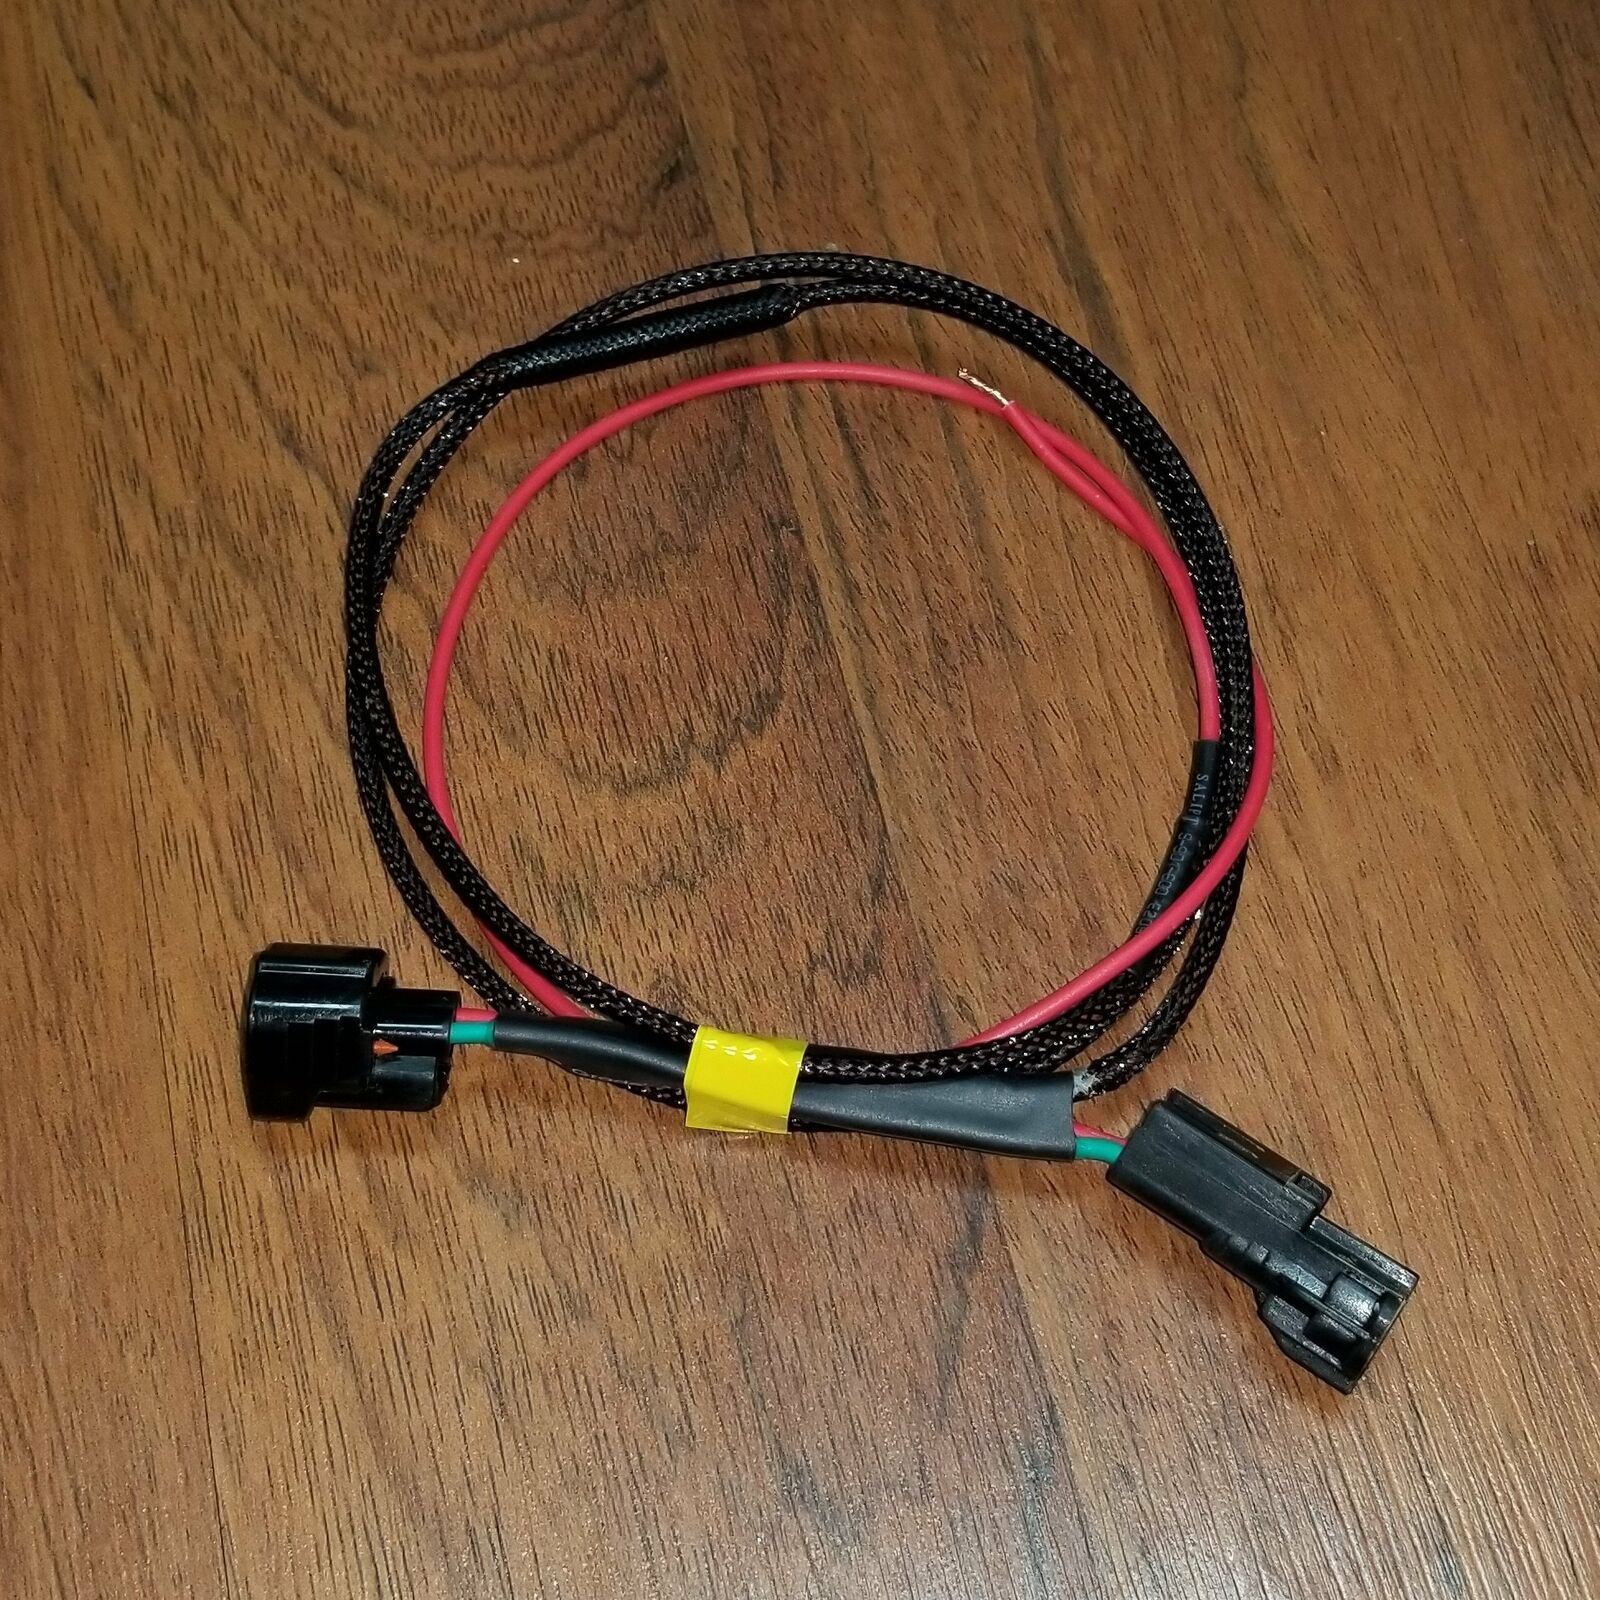 Honda Pioneer - KEY ON POWER Accessory Harness for Pioneer 1000, 500, and 700. 